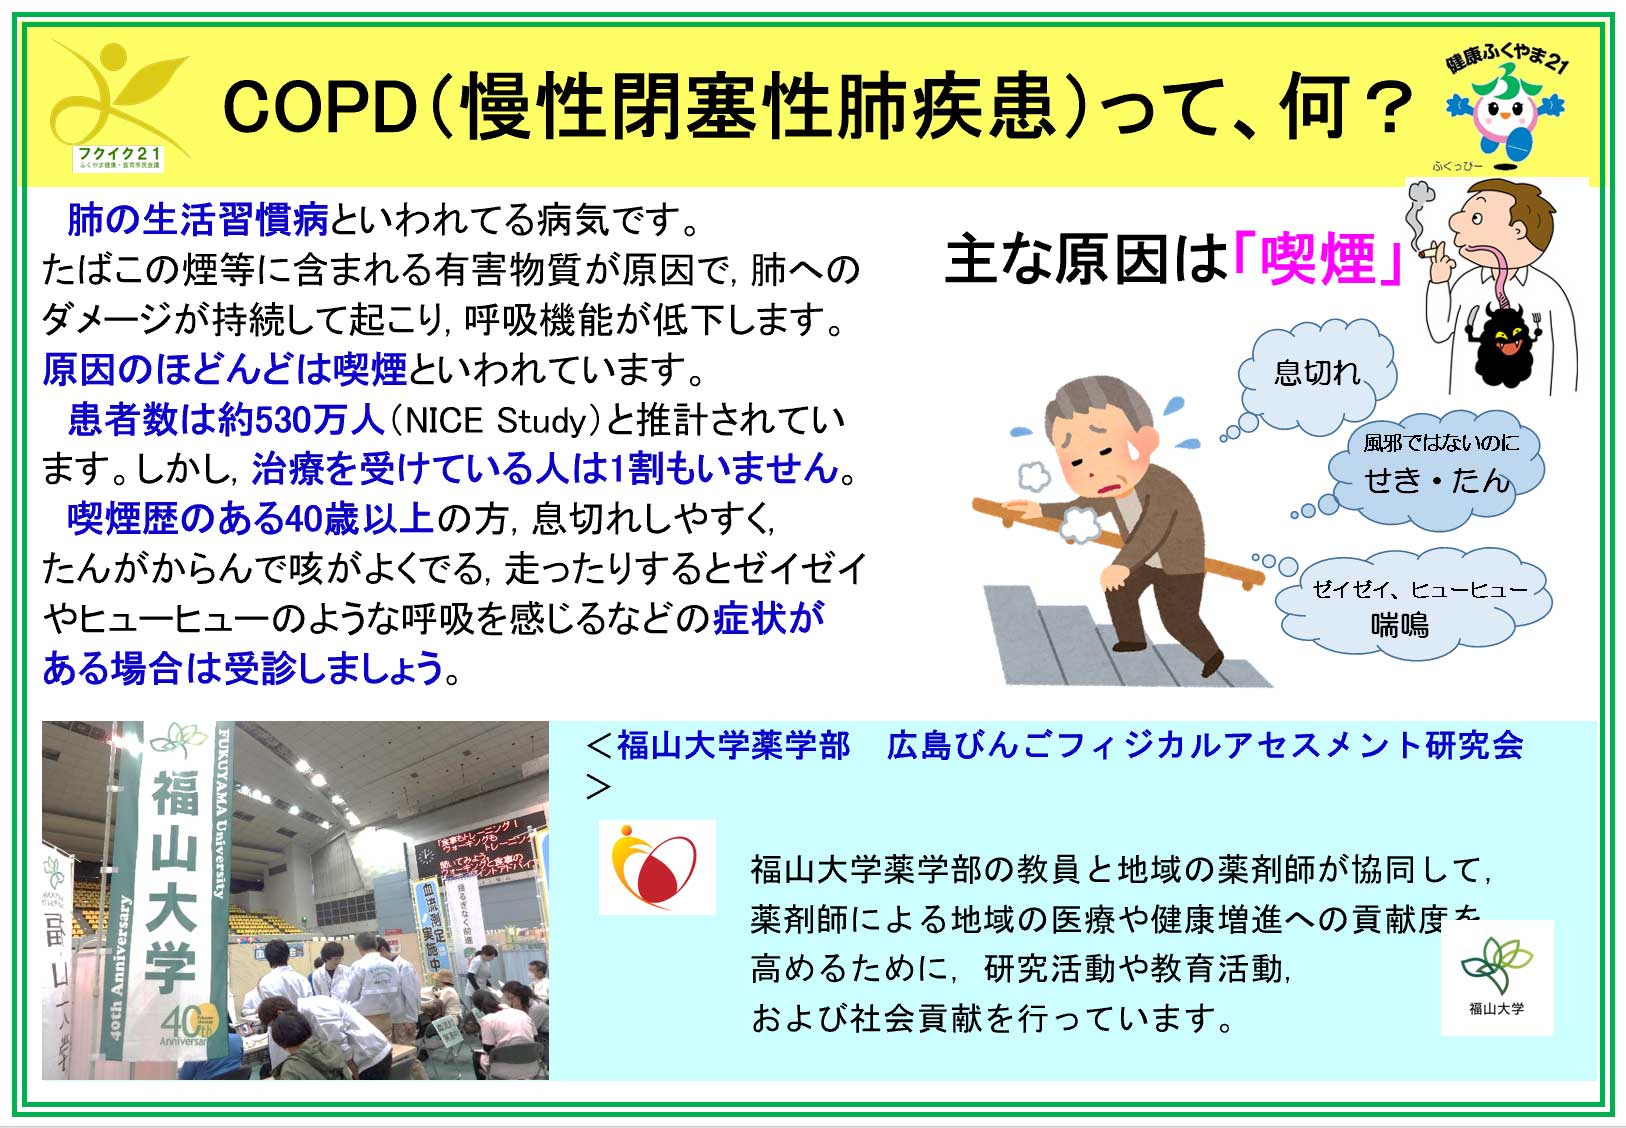 COPD（慢性閉塞性肺疾患）って、何？